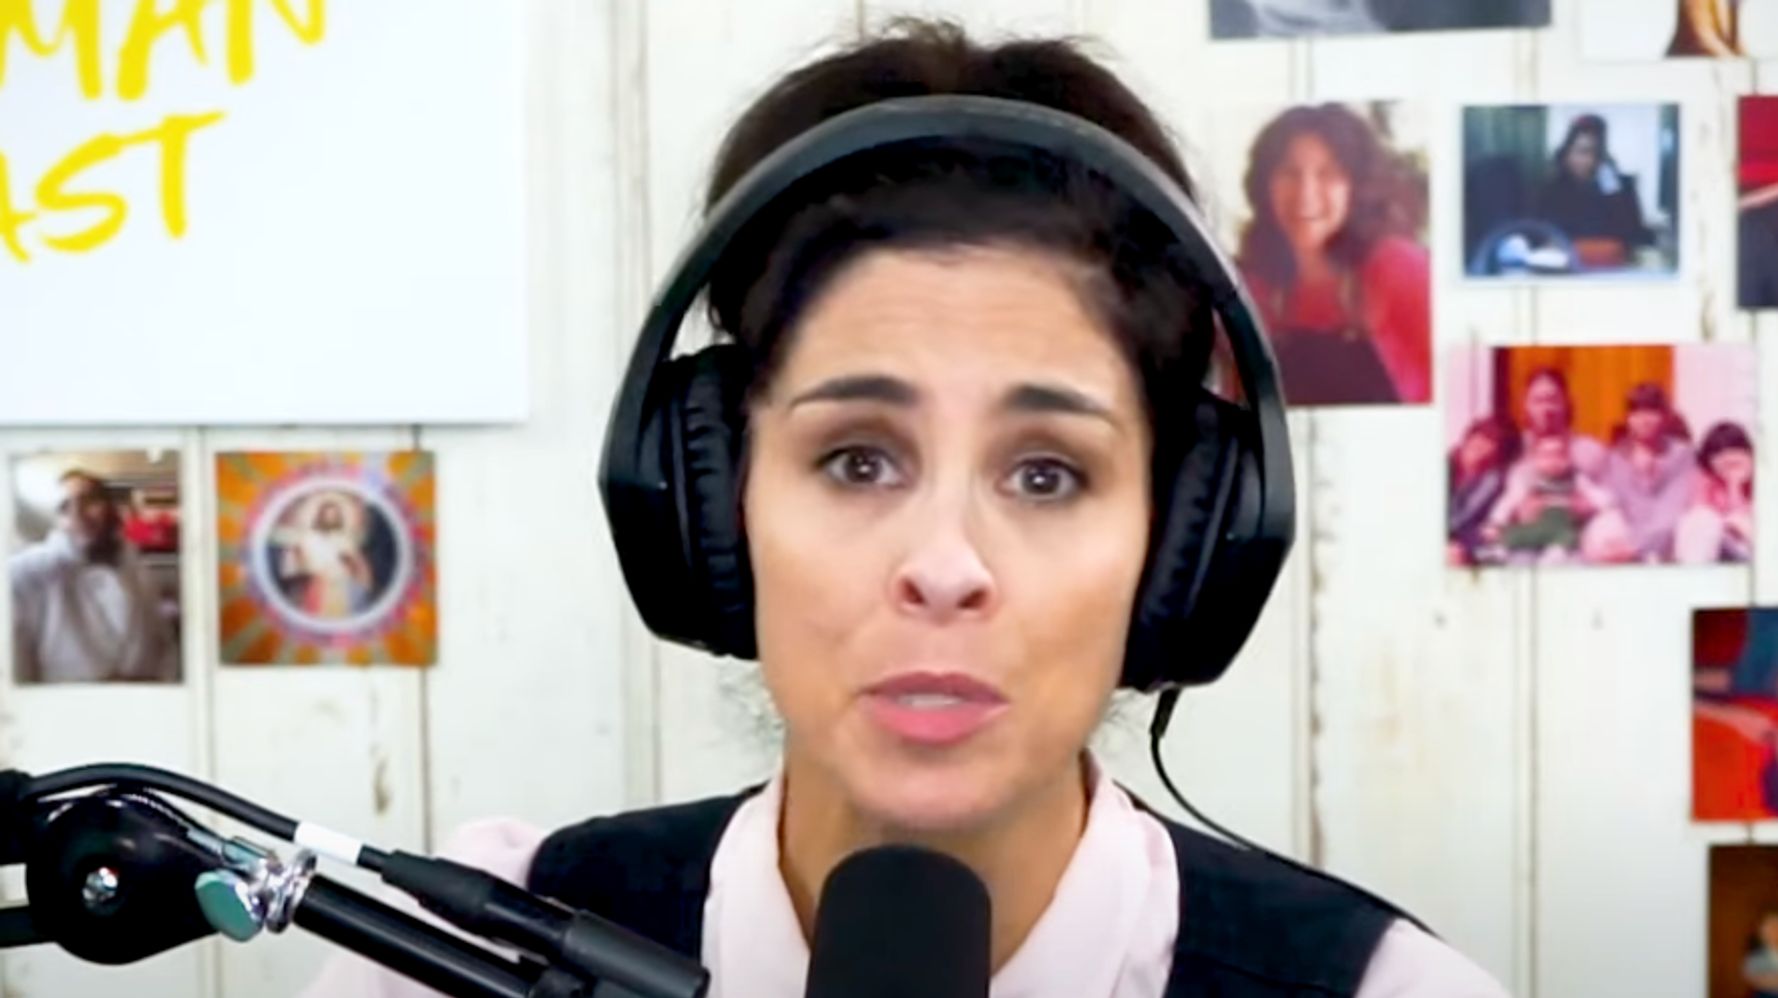 Sarah Silverman Calls Out 'Jewface' In Hollywood's Casting Of Women's Roles